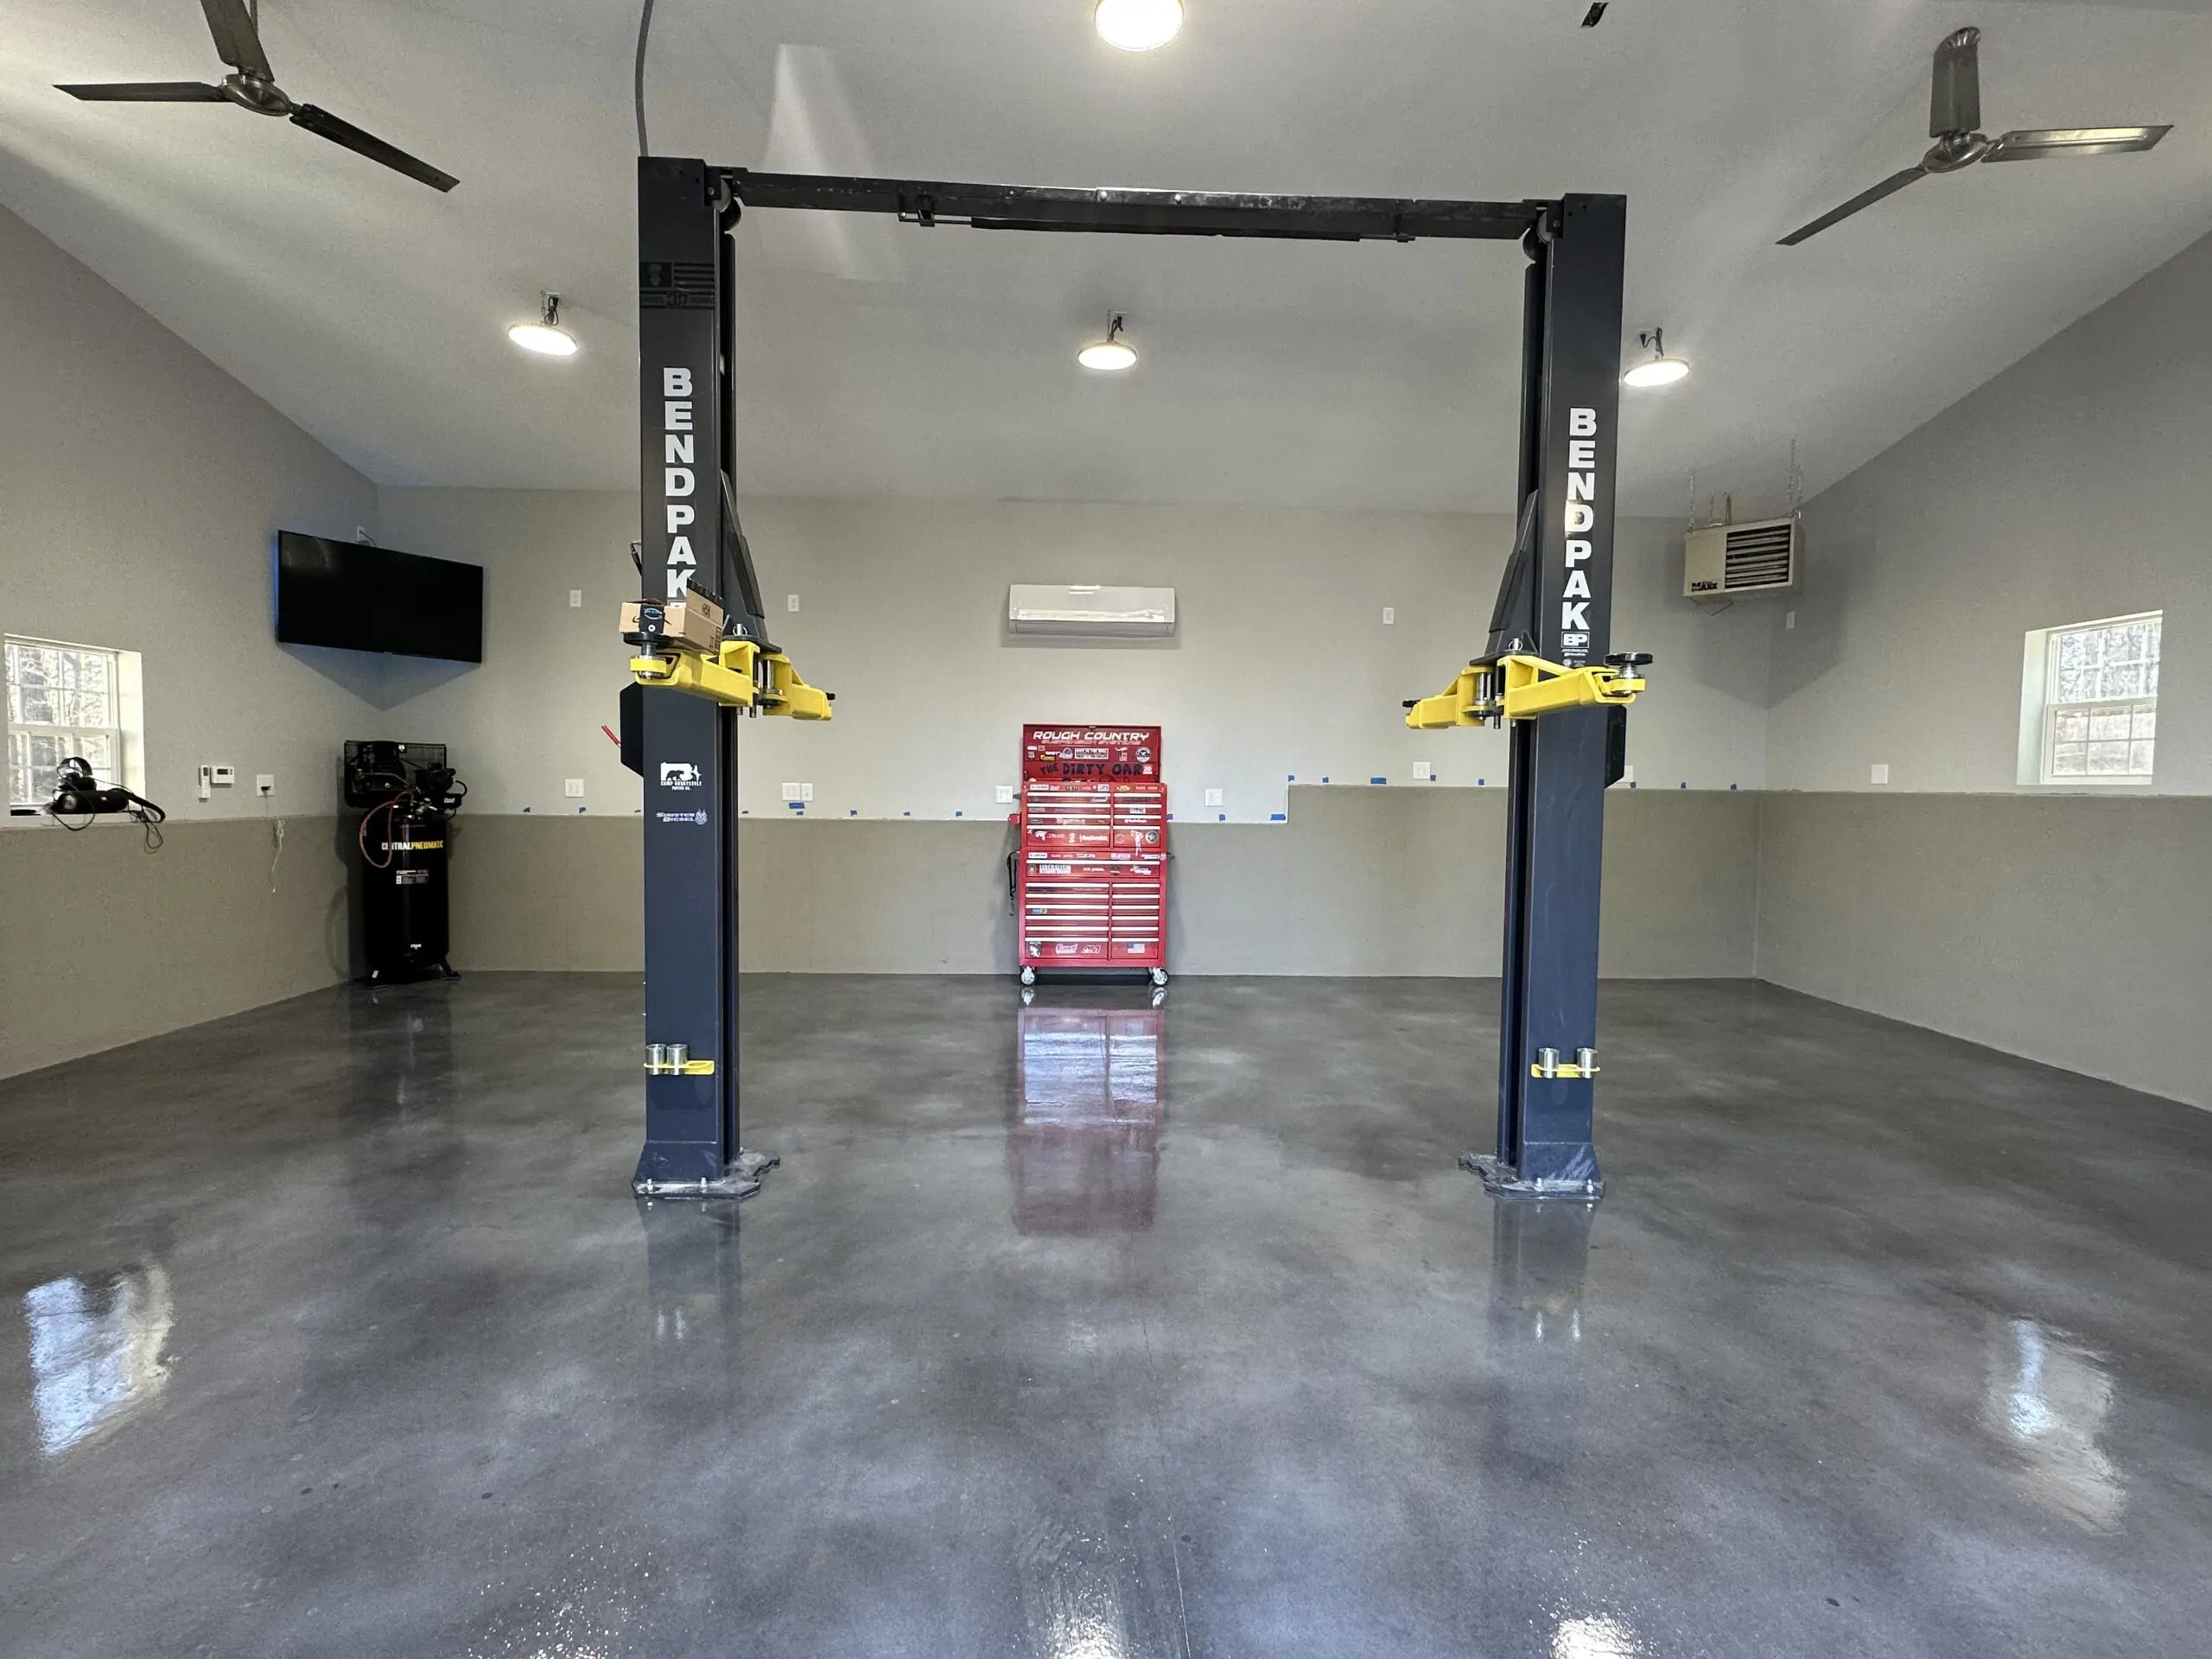 A striking transformation of a plain concrete garage floor into a unique, eye-catching surface using Vibrance concrete dye in charcoal, stormy gray, and white shades